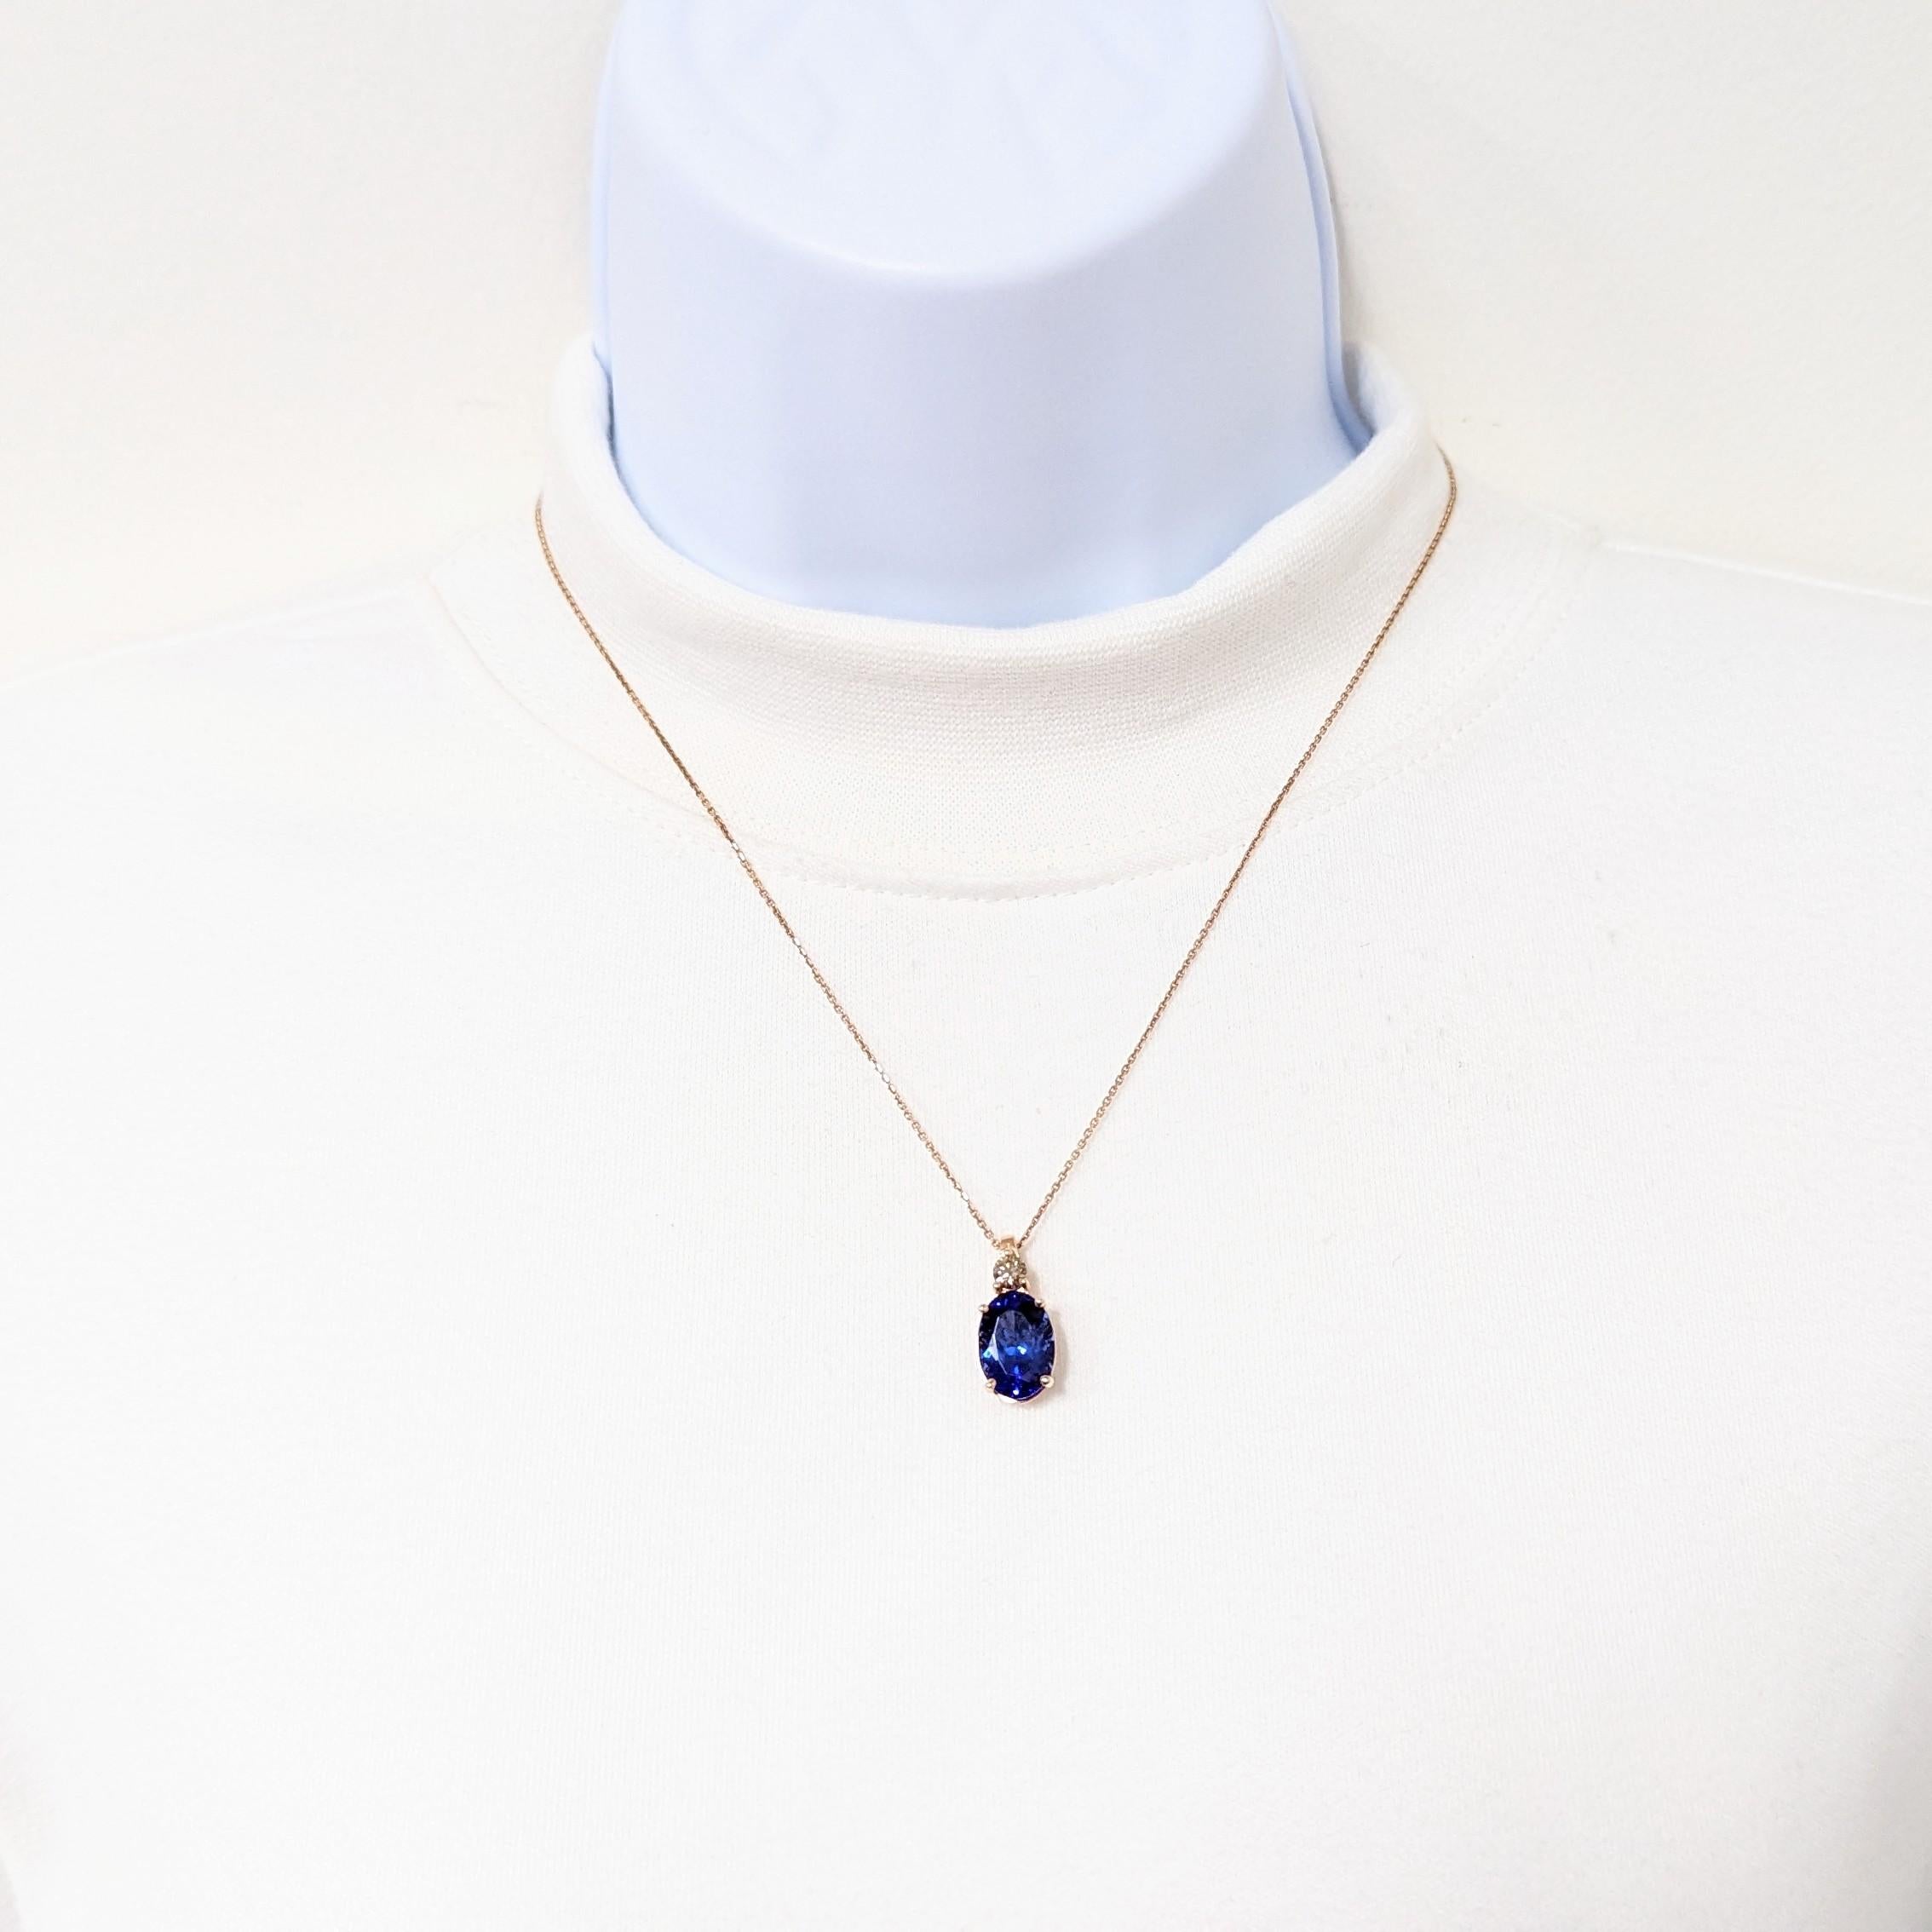 Beautiful 6.20 ct. tanzanite oval with 0.31 ct. champagne diamond rounds.  Handmade in 14k rose gold.  Length of chain is 18